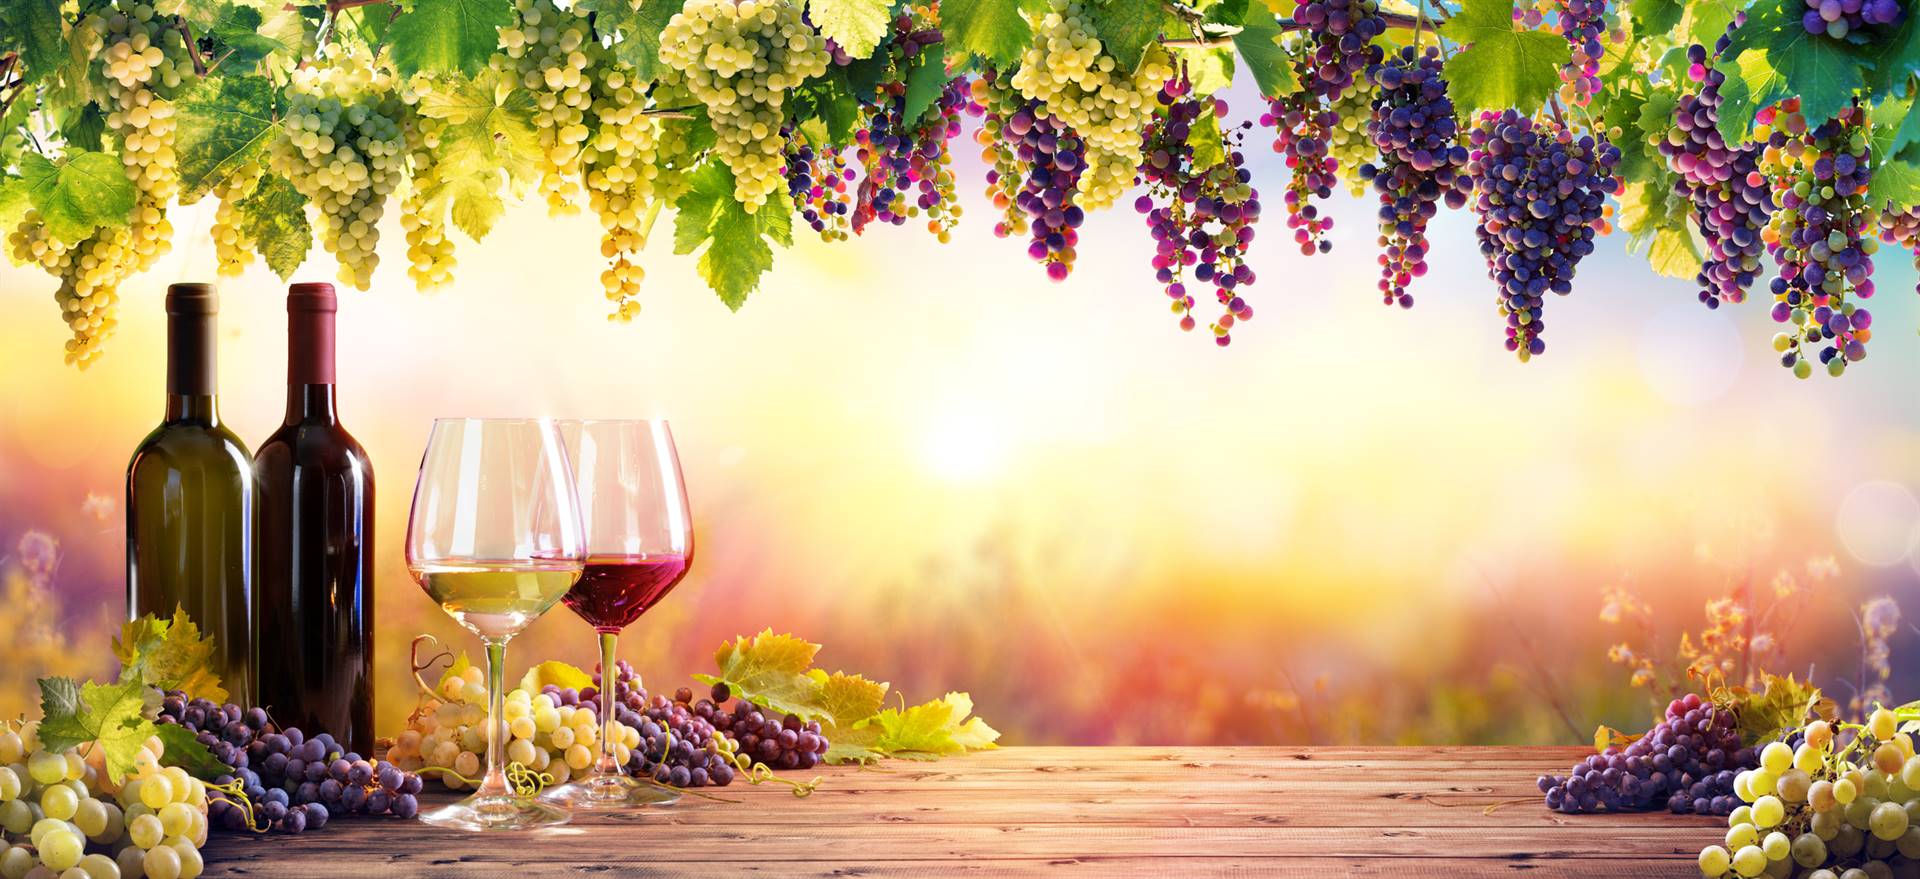 Despite a drought that hit the grape harvest, production rose 3% to 9.7 mhl in South Africa. Picture: iStock/Gallo Images